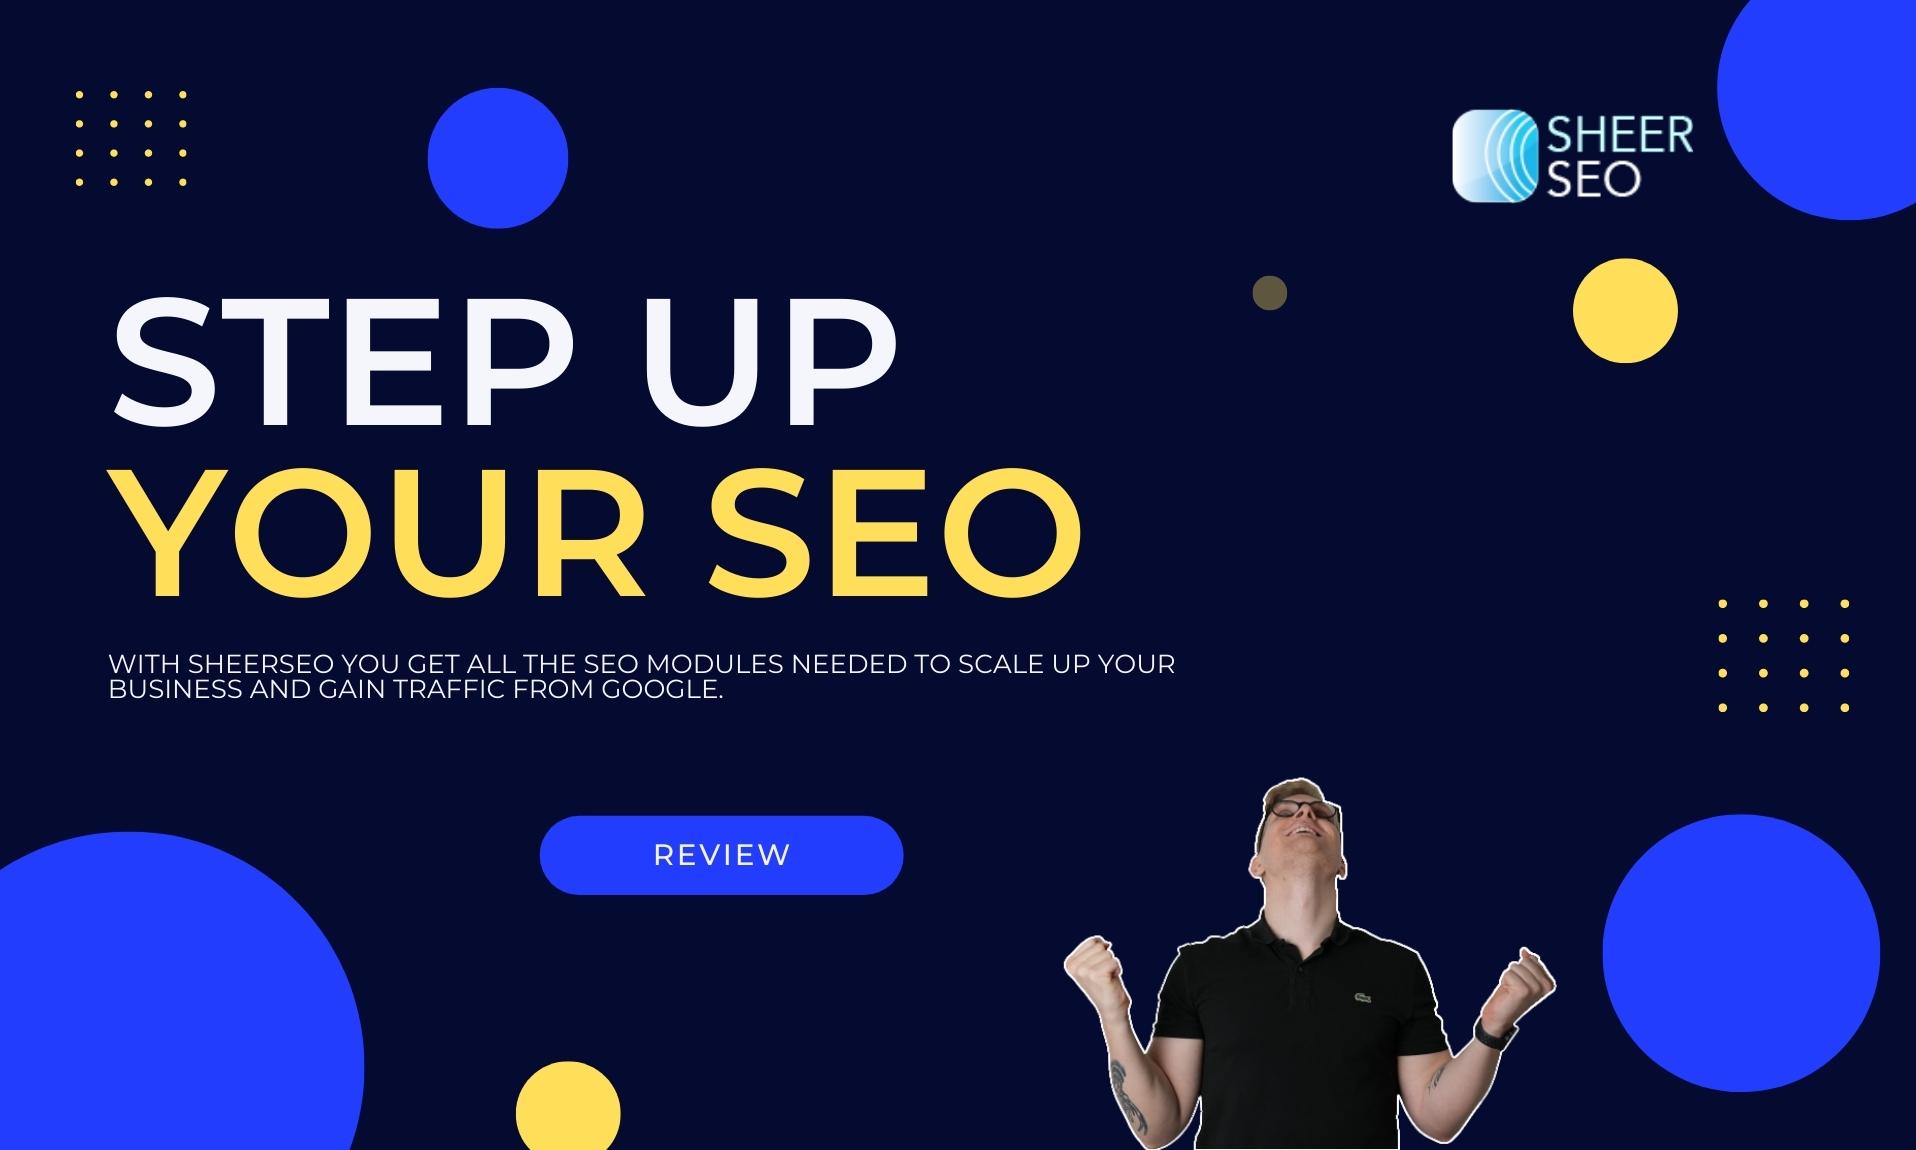 SheerSEO review - Find SEO Content Ideas